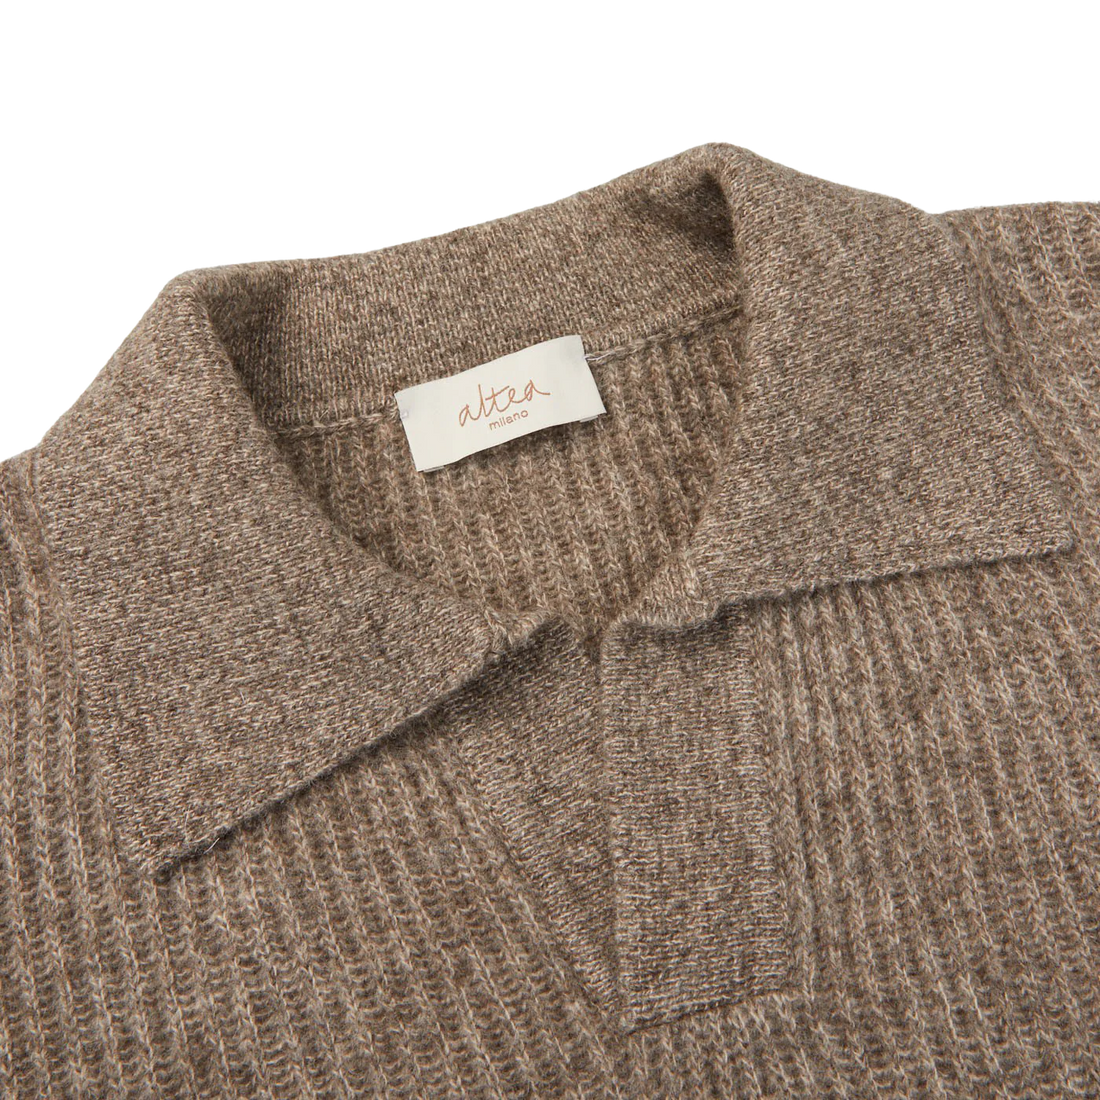 Close-up of a beige knitted sweater with a visible brand label on the collar.